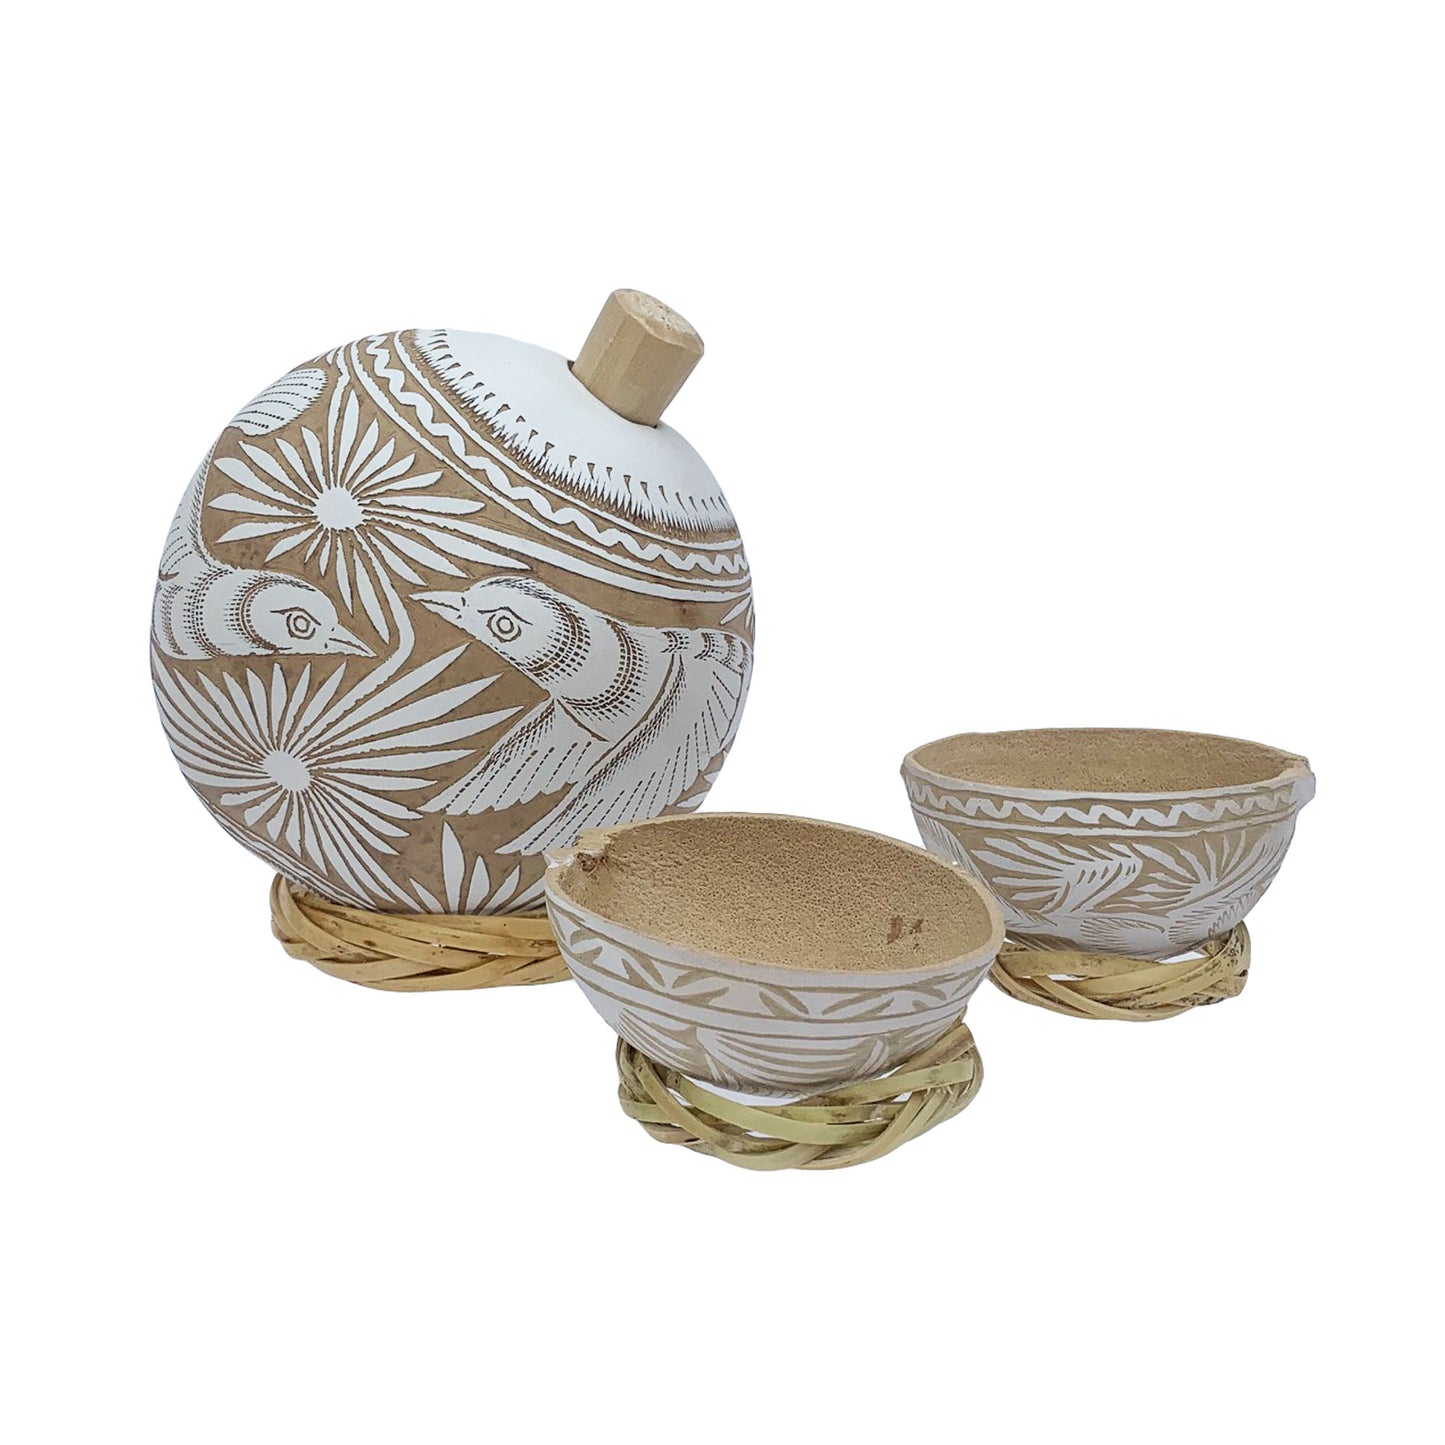 Mezcal or Tequila Jicara Gourd Sipping Set - Available in Black, White and Brown